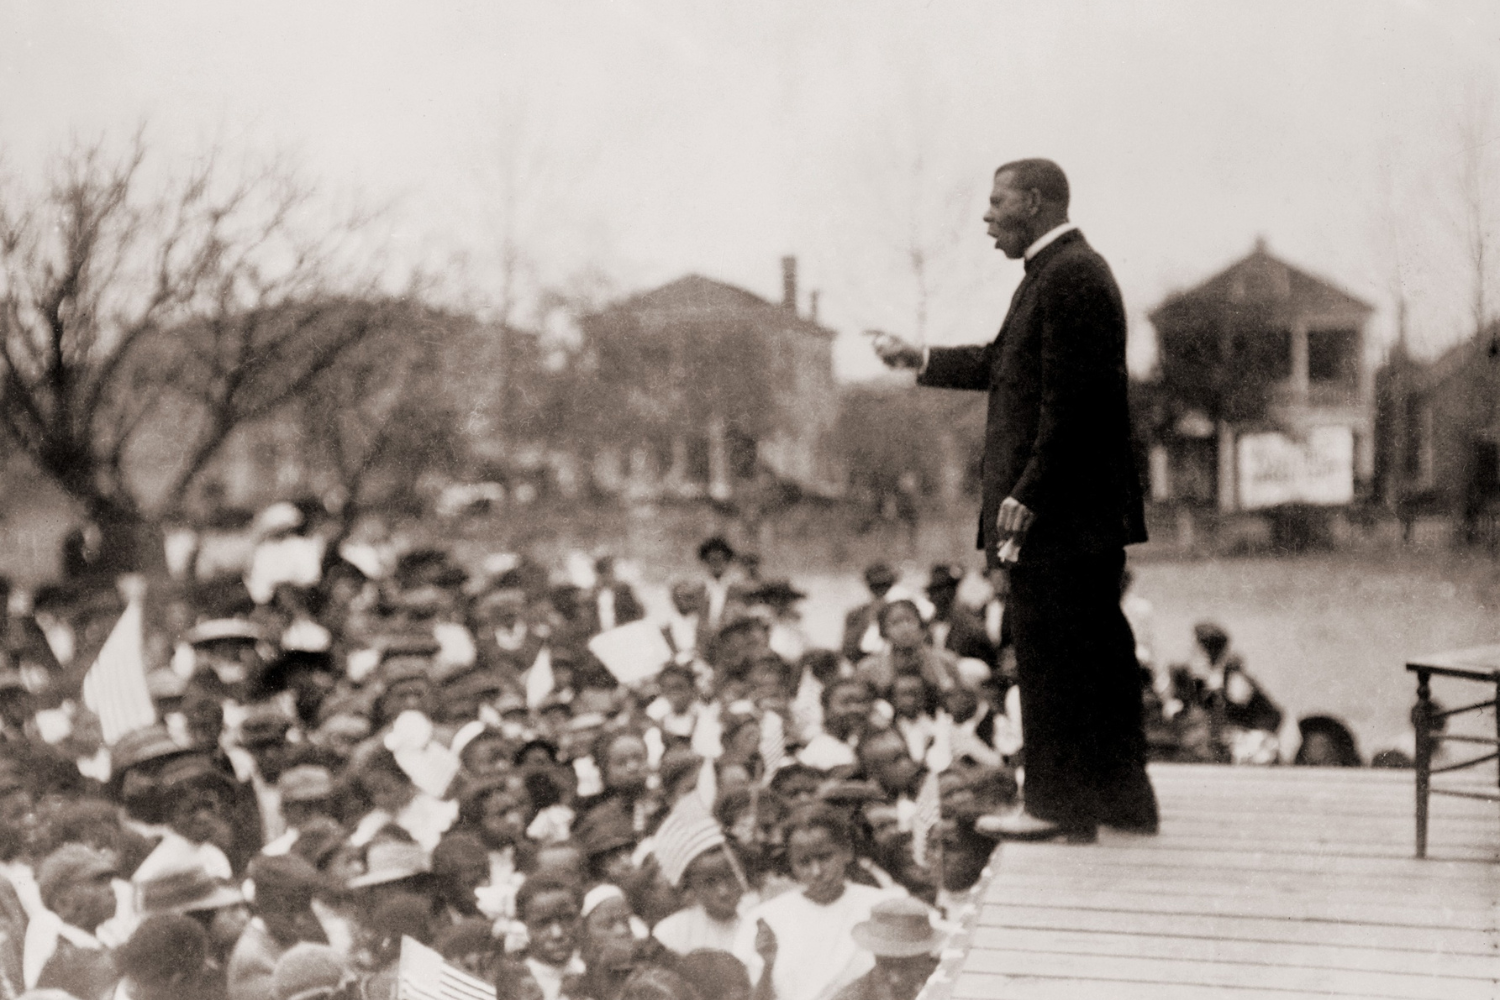 a man on stage giving a speach to a large crowd.